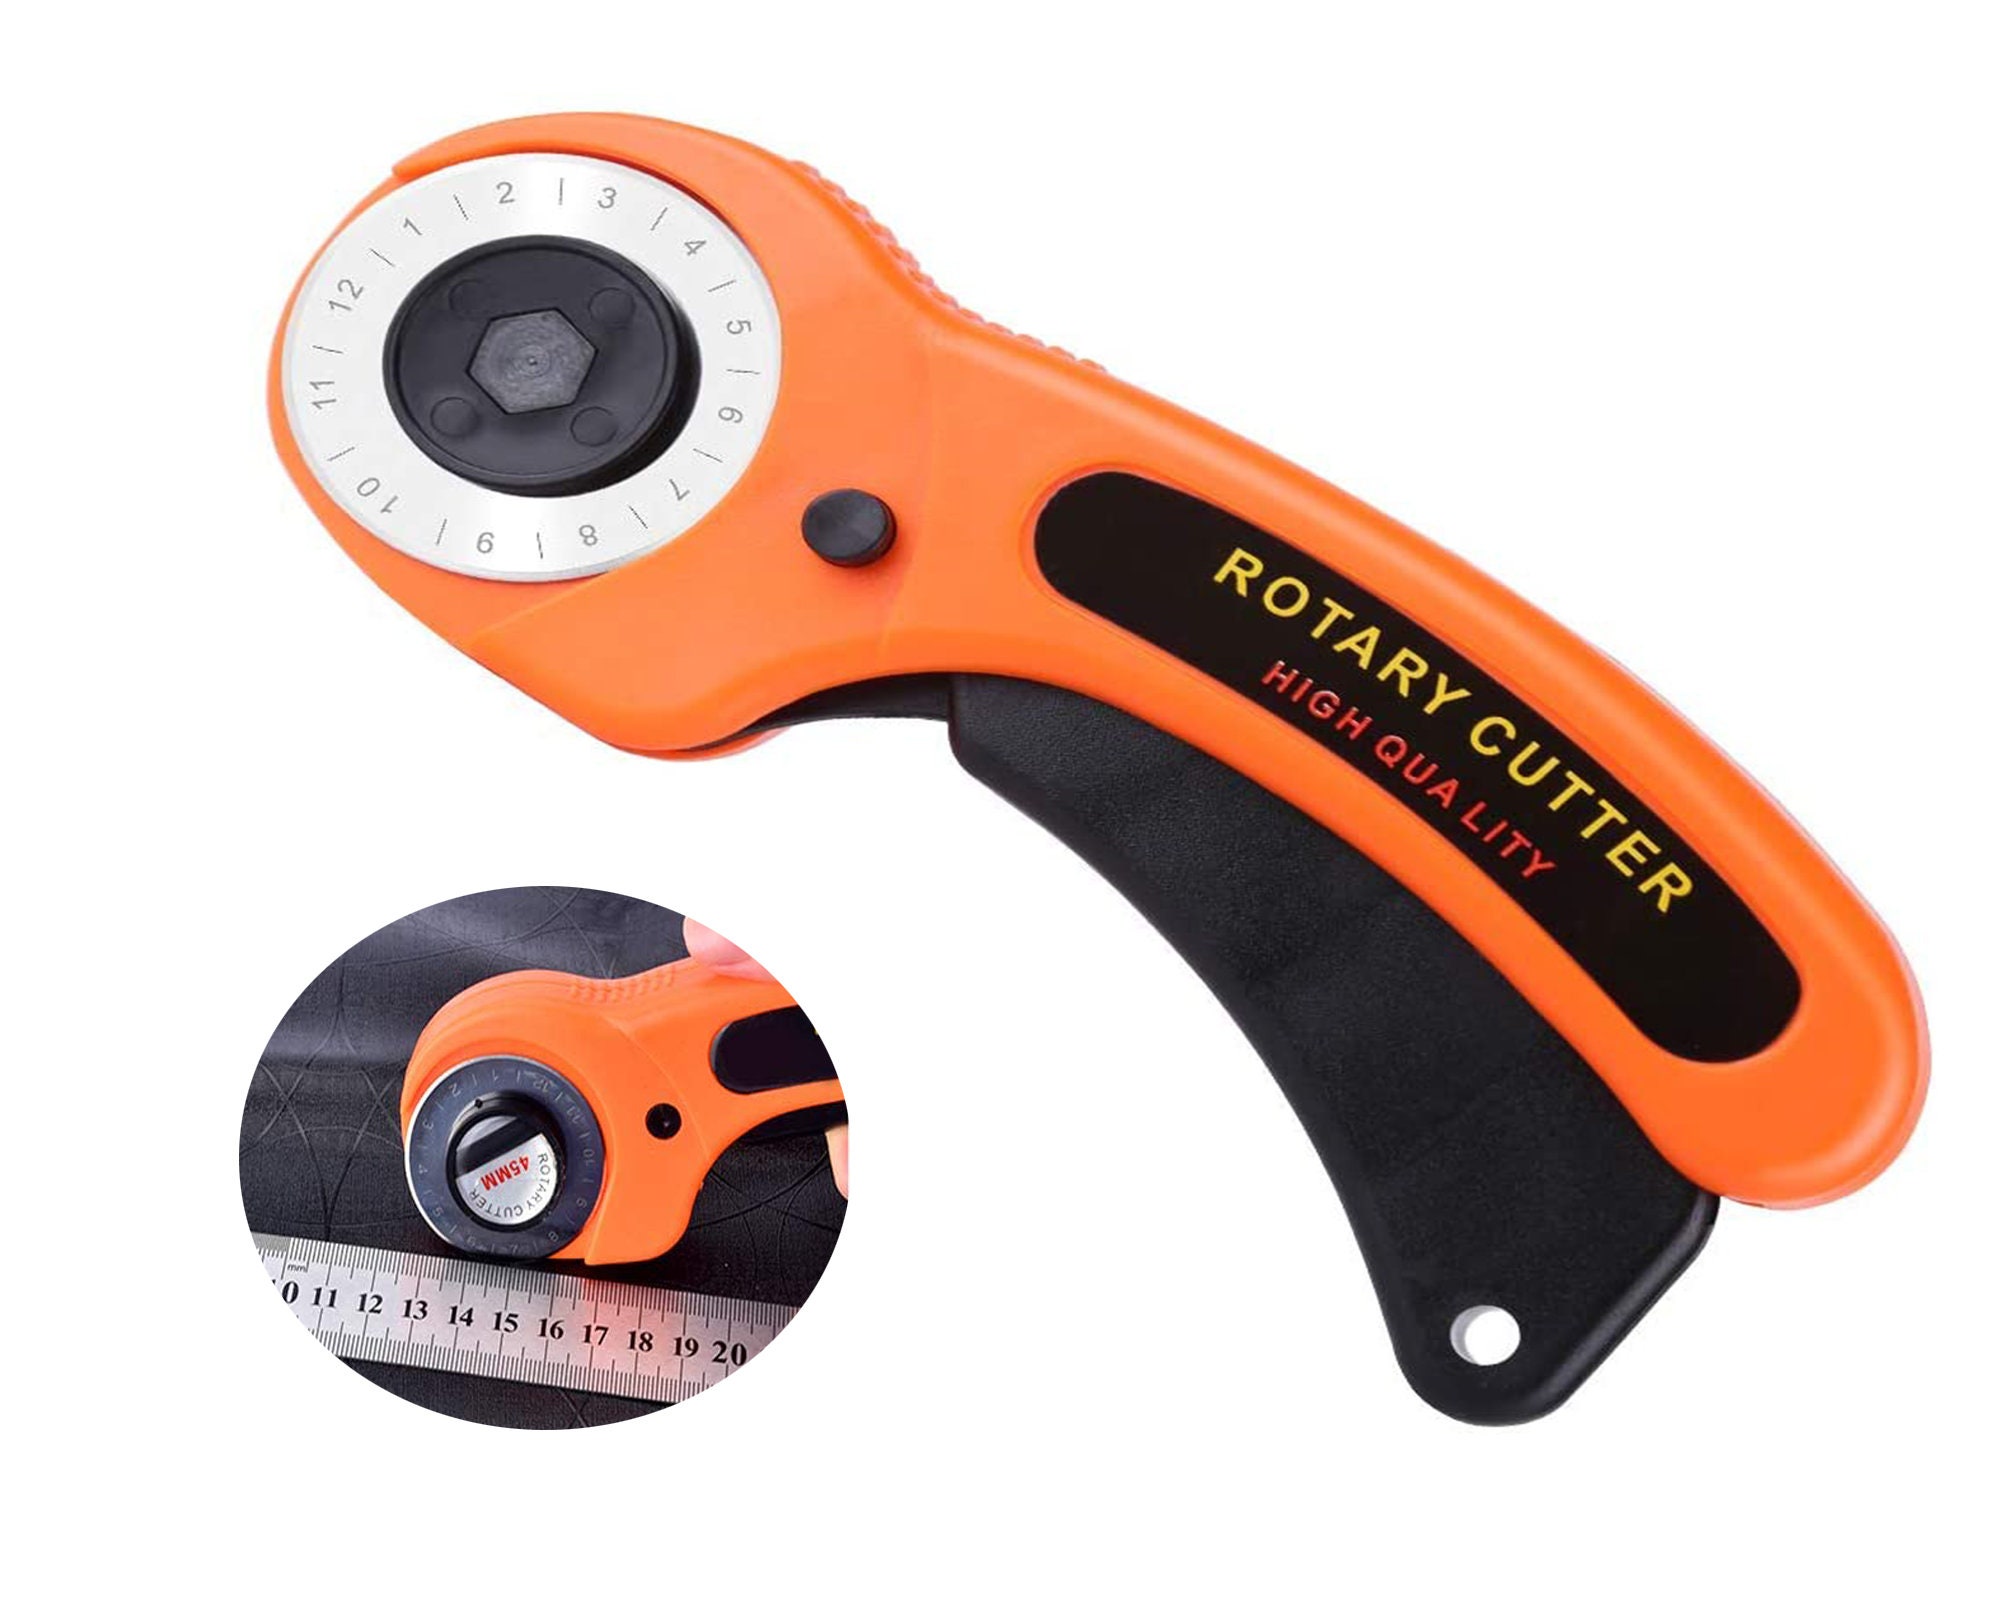 45mm Round Cutters Sewing Rotary Cloth Guiding Cutting Machine